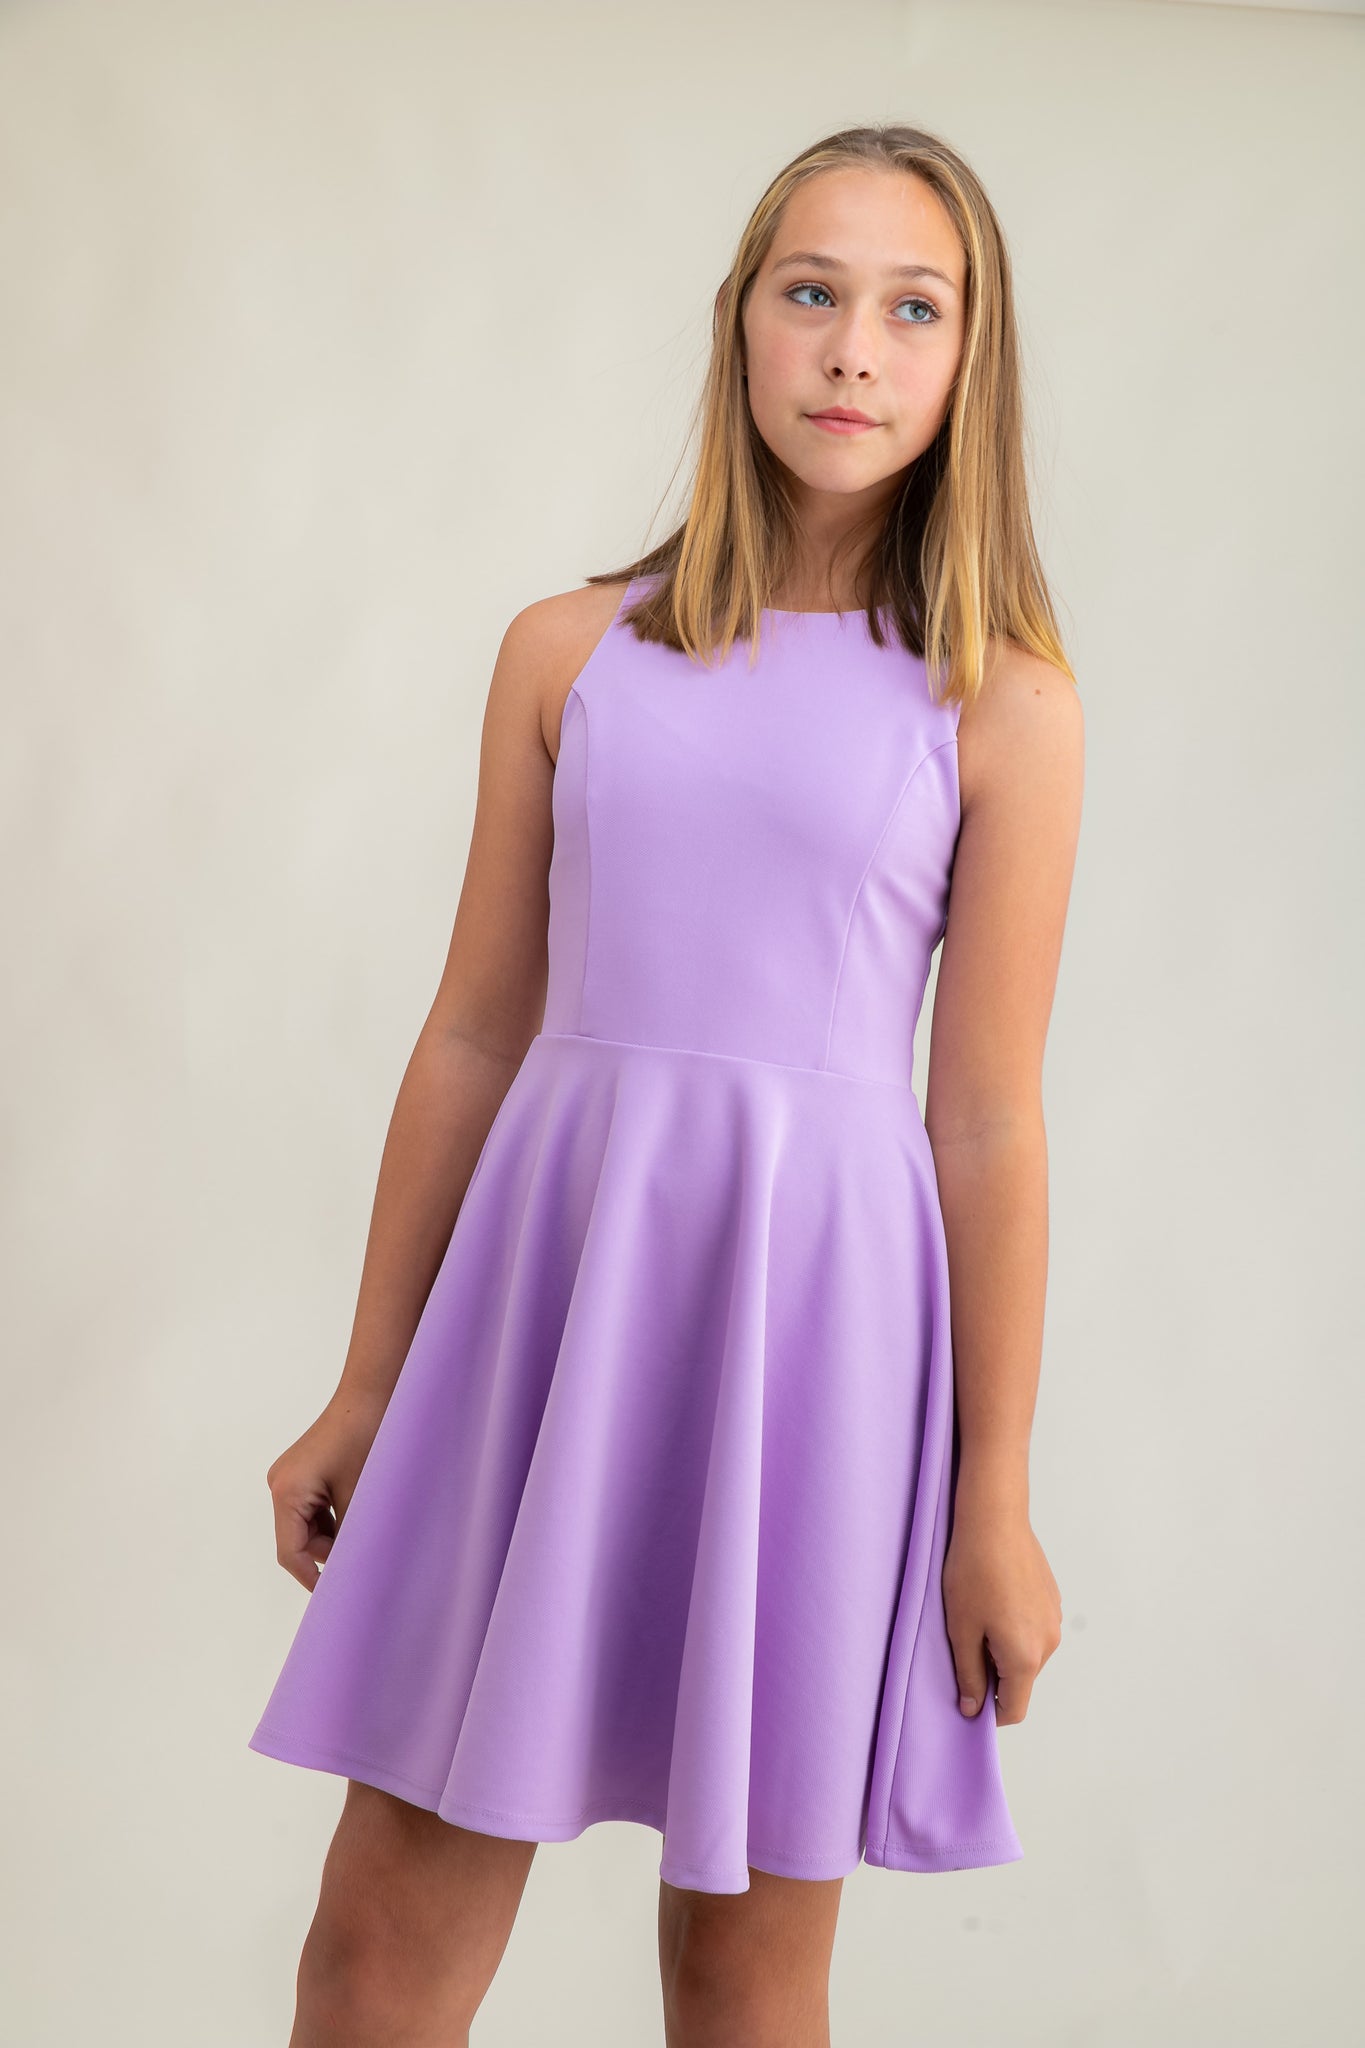 The tank style sleeve textured fit and flare dress is shown in lilac with high neck line, racerback detailing and dart bodice for a chic and sophisticated look. This dress can be worn to a more conservative special occasion event like cotillion, graduation, or religious service like a bat mitzvah service or church ceremony.